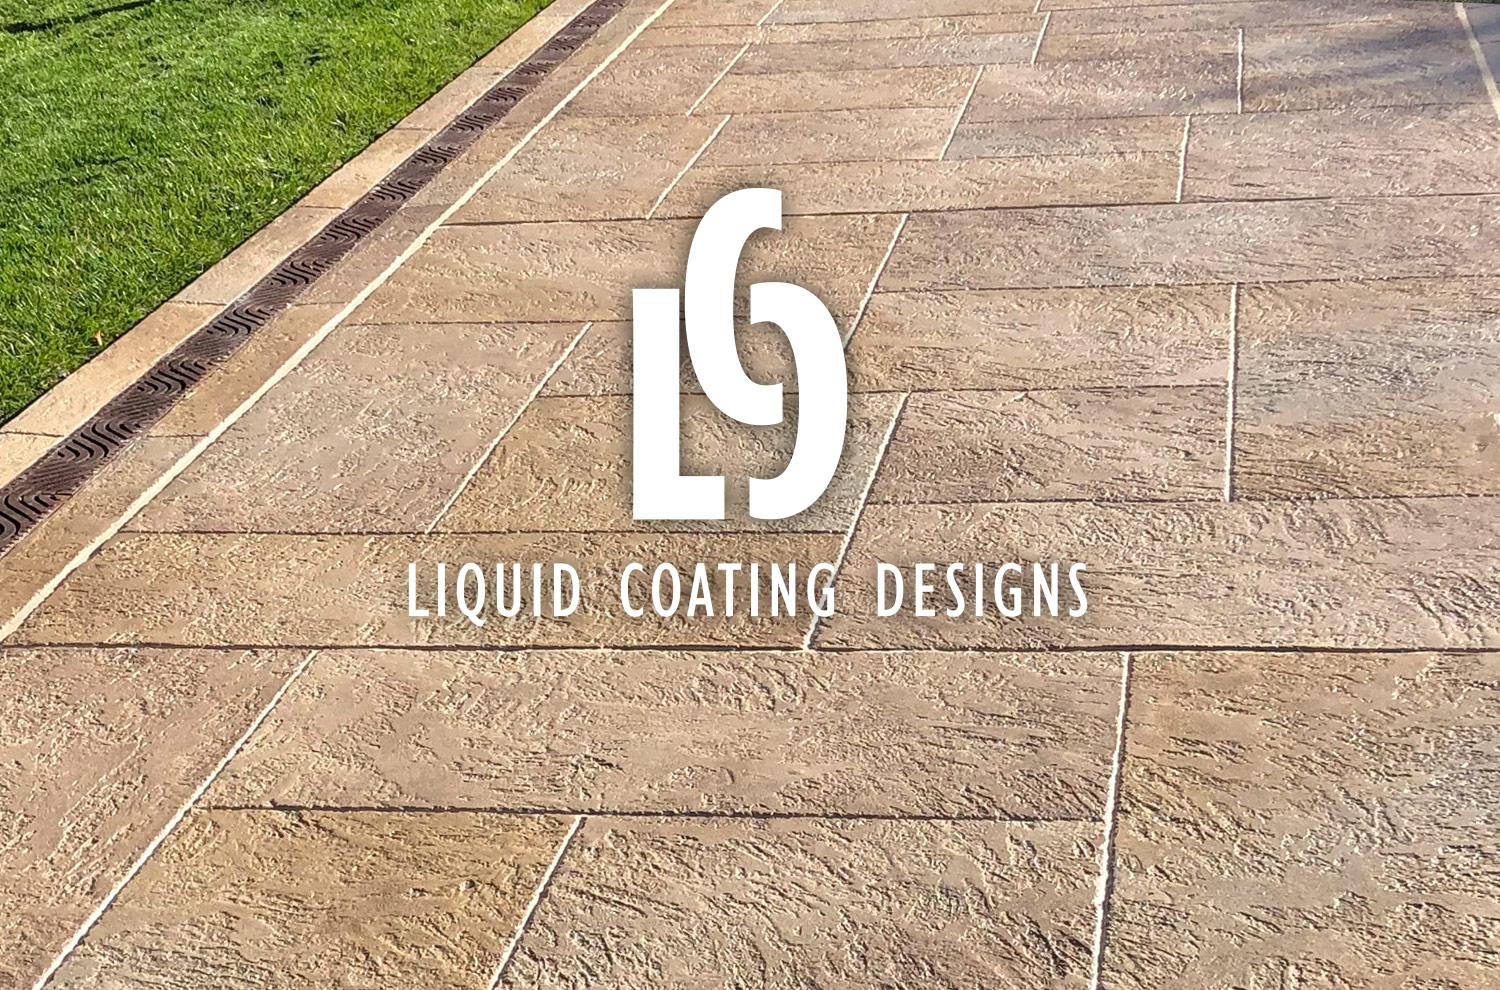 View of a concrete patio with the Liquid Coating Design logo